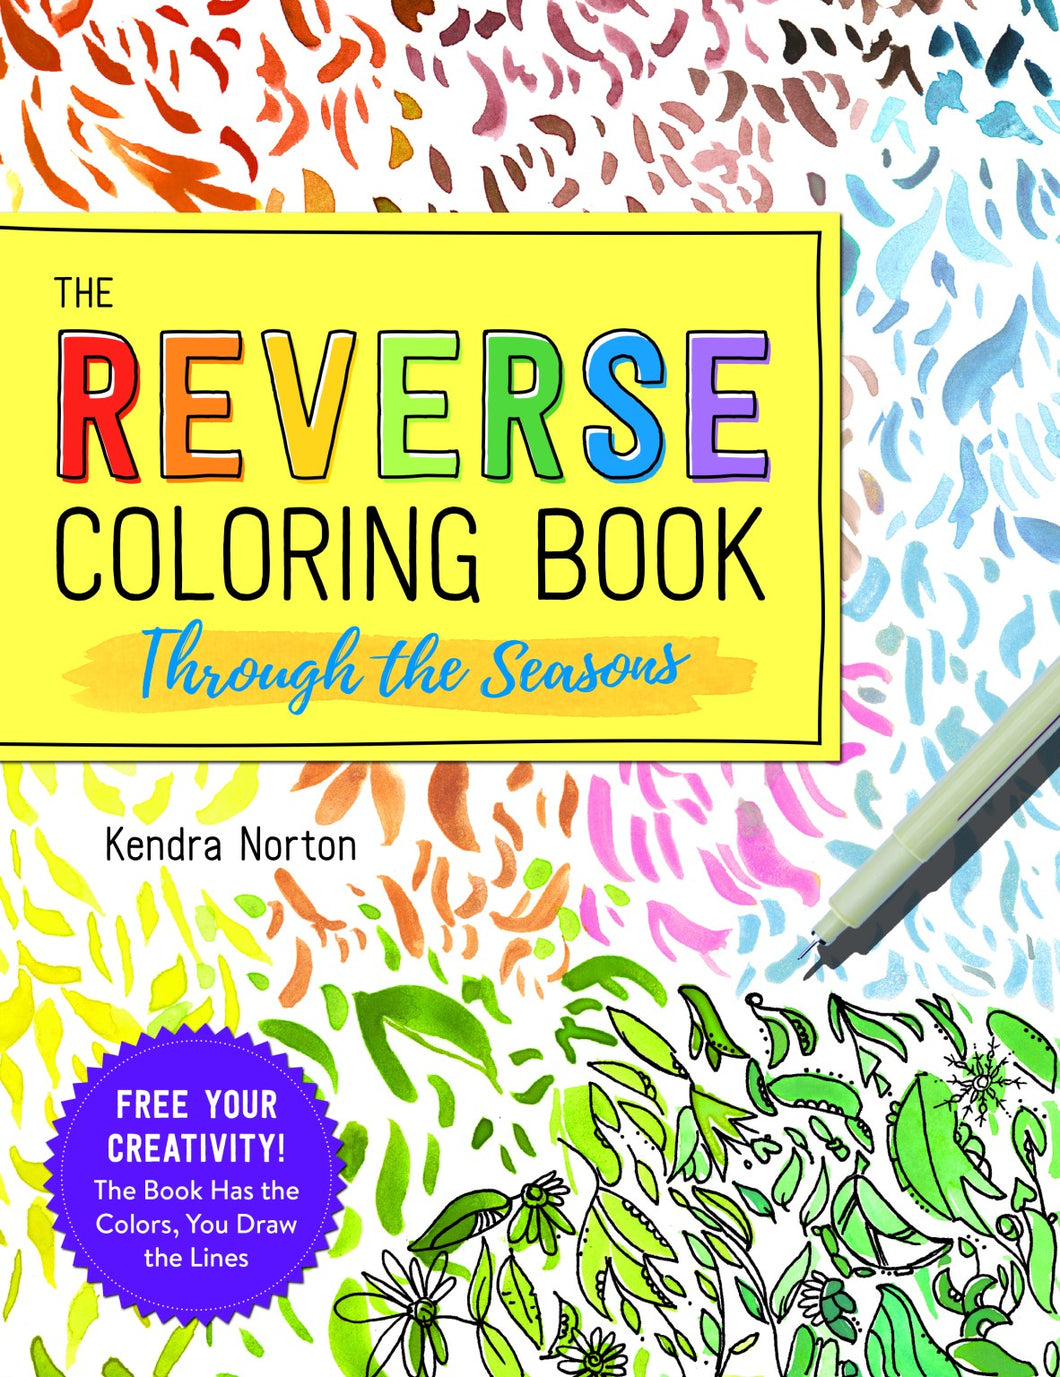 The Reverse Coloring Book Through The Seasons